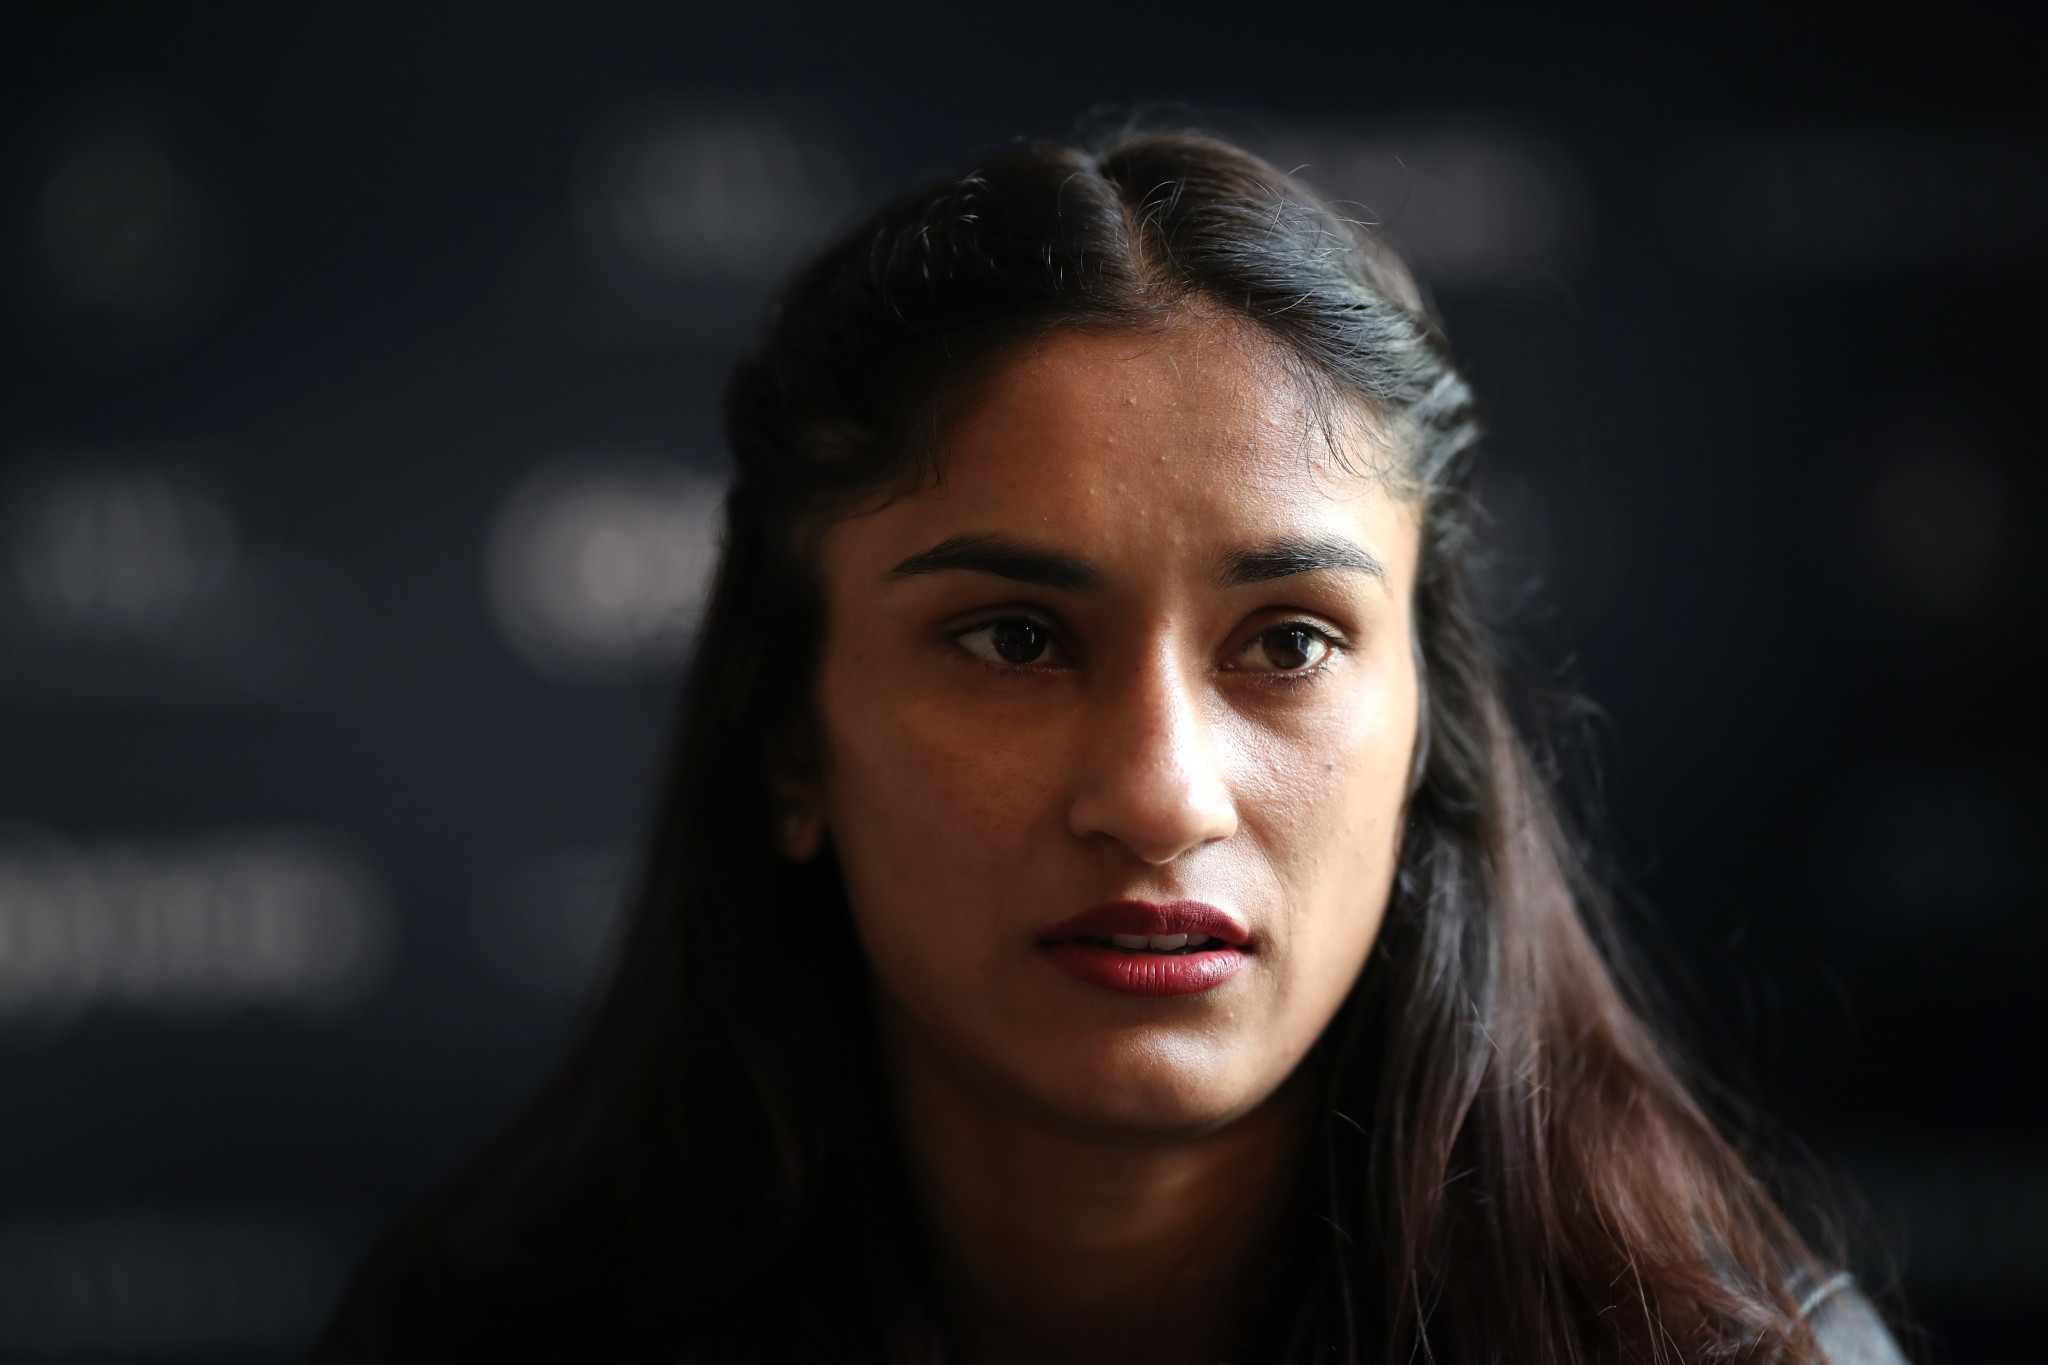 Phogat considering legal action against WFI after complaints of investigation 